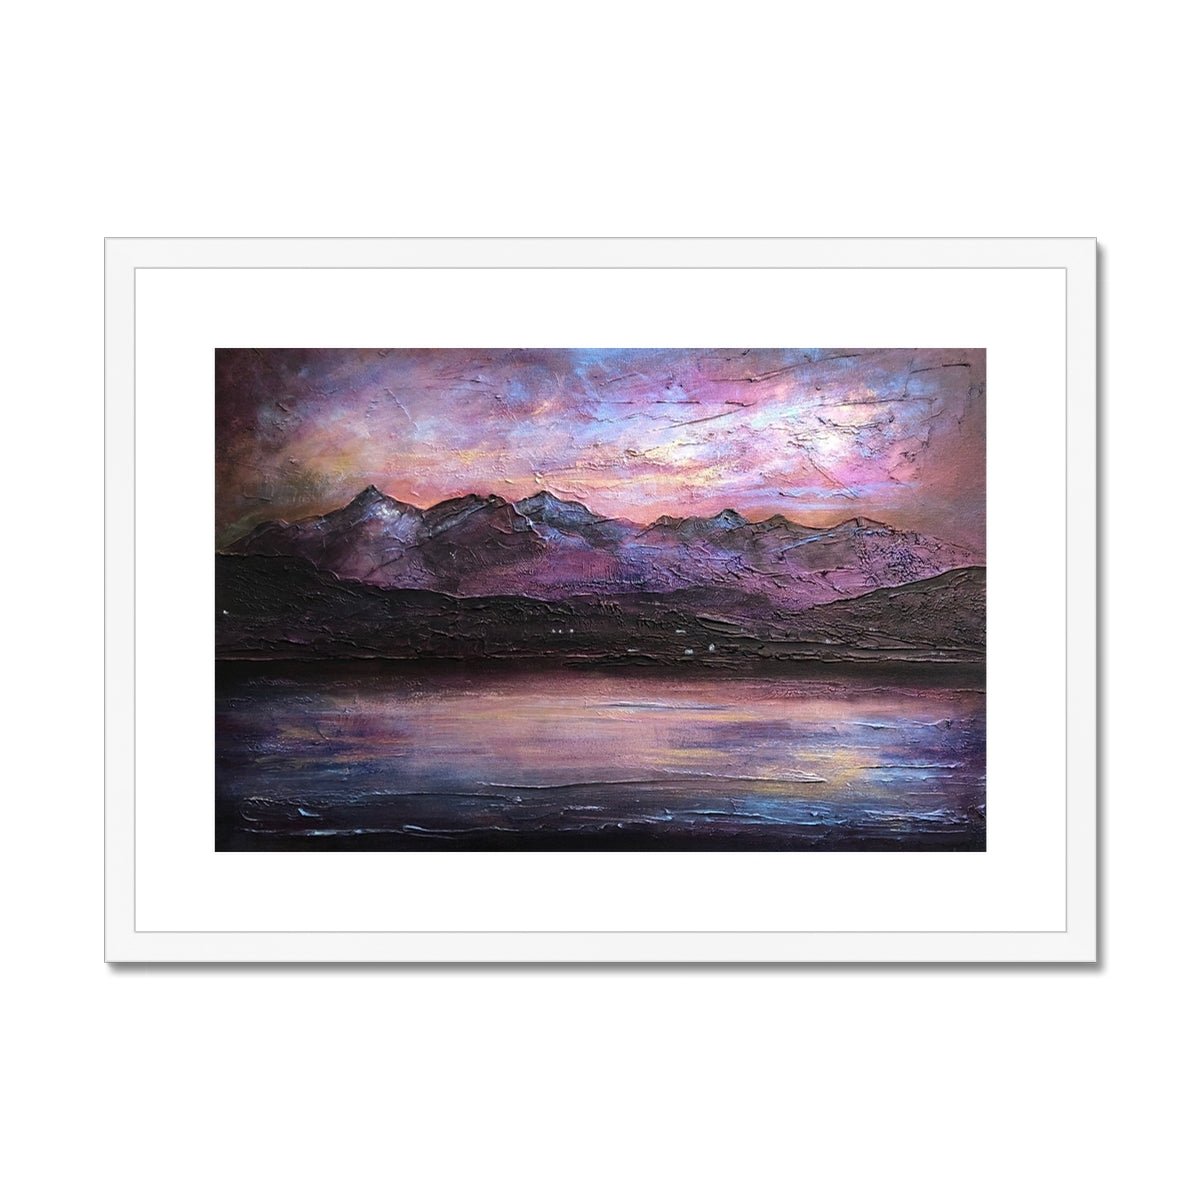 Last Skye Light Painting | Framed & Mounted Prints From Scotland-Framed & Mounted Prints-Skye Art Gallery-A2 Landscape-White Frame-Paintings, Prints, Homeware, Art Gifts From Scotland By Scottish Artist Kevin Hunter